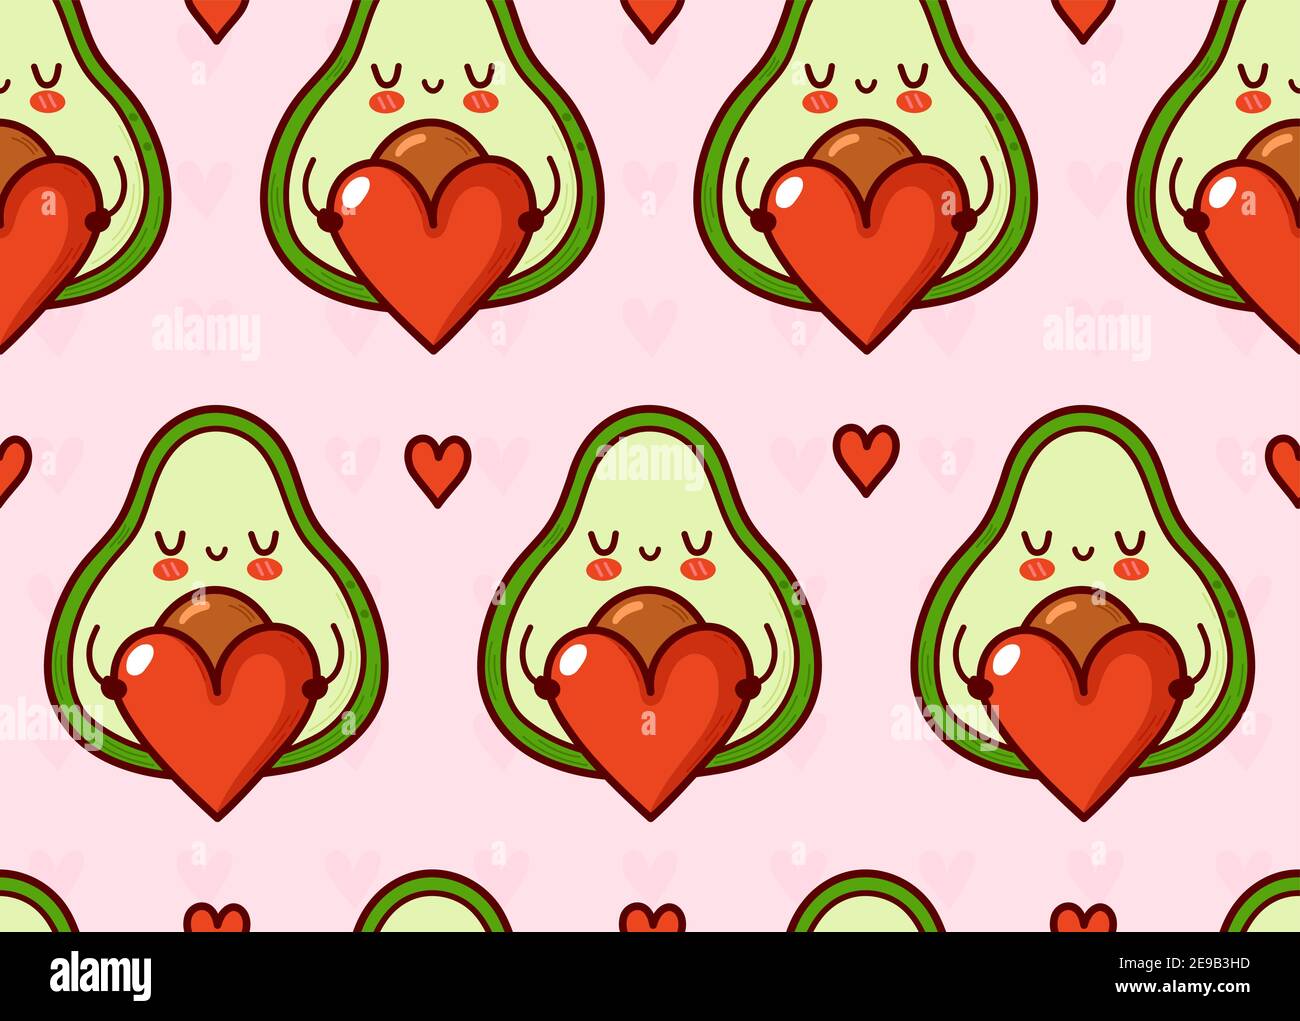 Happy Animated Valentines Day Cute Heart Bouncing GIF  GIFDBcom